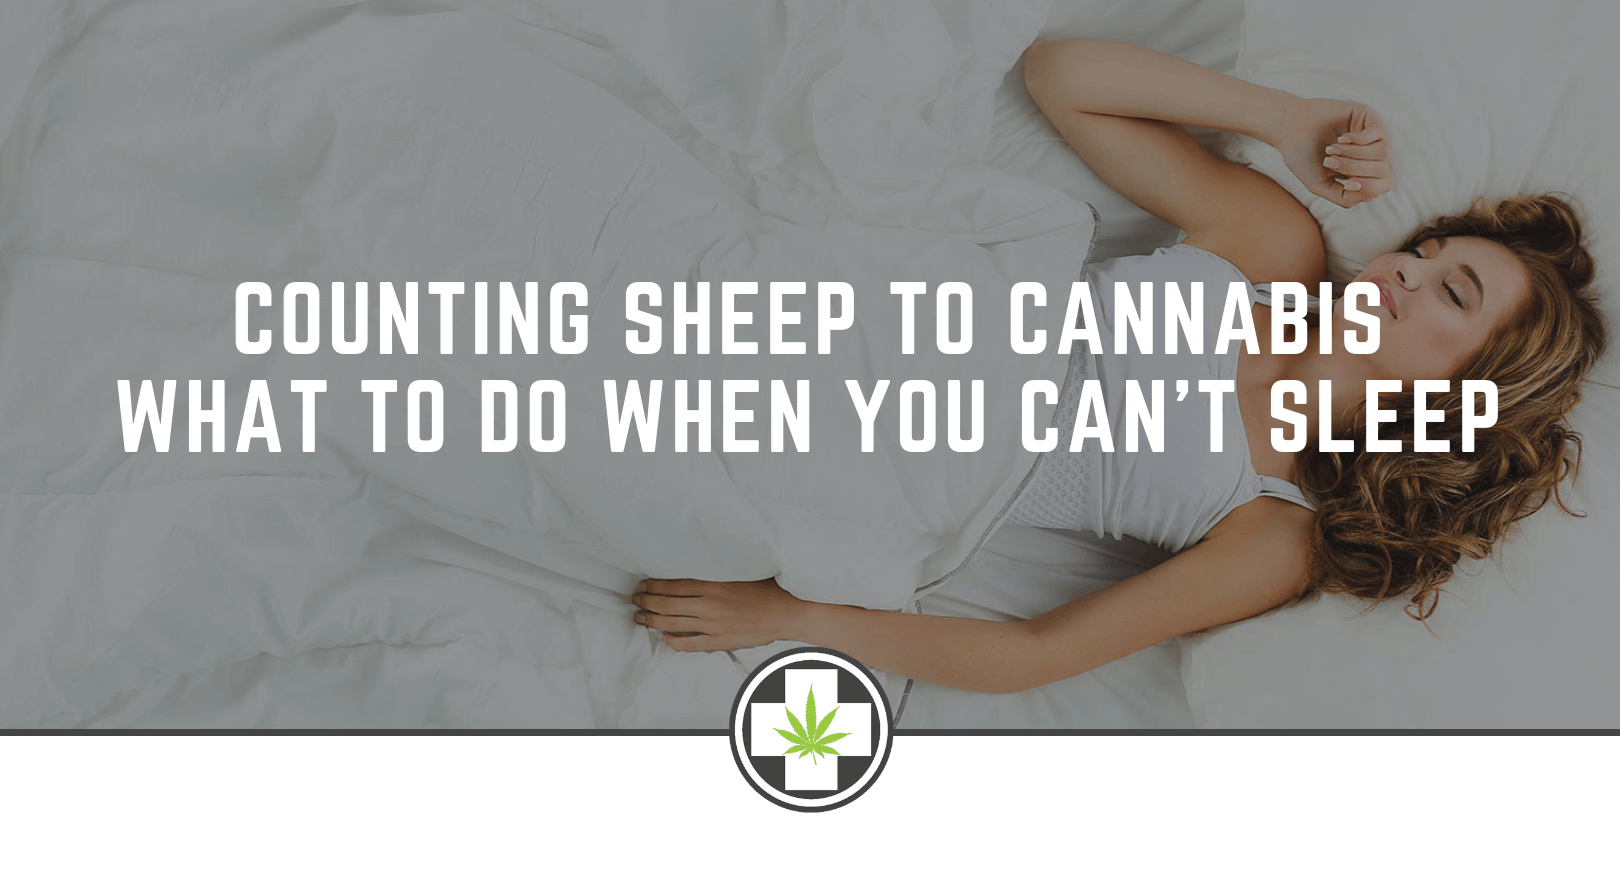 Counting Sheep to Cannabis – What to do When You Can’t Sleep